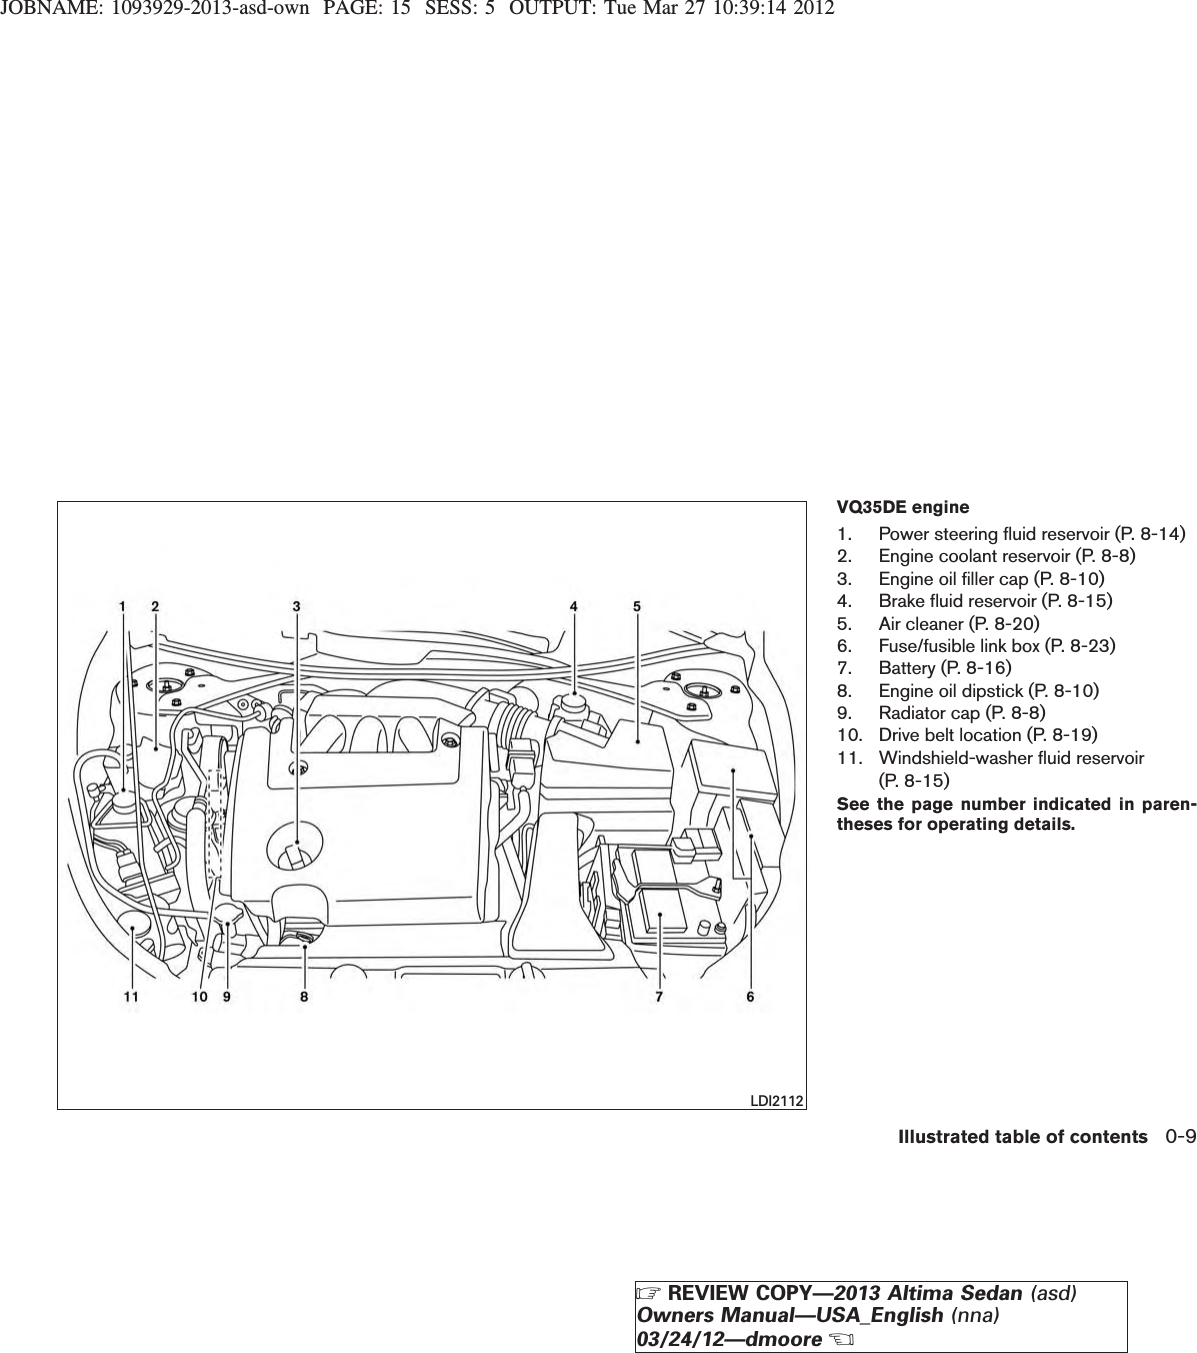 JOBNAME: 1093929-2013-asd-own PAGE: 15 SESS: 5 OUTPUT: Tue Mar 27 10:39:14 2012VQ35DE engine1. Power steering fluid reservoir (P. 8-14)2. Engine coolant reservoir (P. 8-8)3. Engine oil filler cap (P. 8-10)4. Brake fluid reservoir (P. 8-15)5. Air cleaner (P. 8-20)6. Fuse/fusible link box (P. 8-23)7. Battery (P. 8-16)8. Engine oil dipstick (P. 8-10)9. Radiator cap (P. 8-8)10. Drive belt location (P. 8-19)11. Windshield-washer fluid reservoir(P. 8-15)See the page number indicated in paren-theses for operating details.LDI2112Illustrated table of contents 0-9ZREVIEW COPY—2013 Altima Sedan (asd)Owners Manual—USA_English (nna)03/24/12—dmooreX